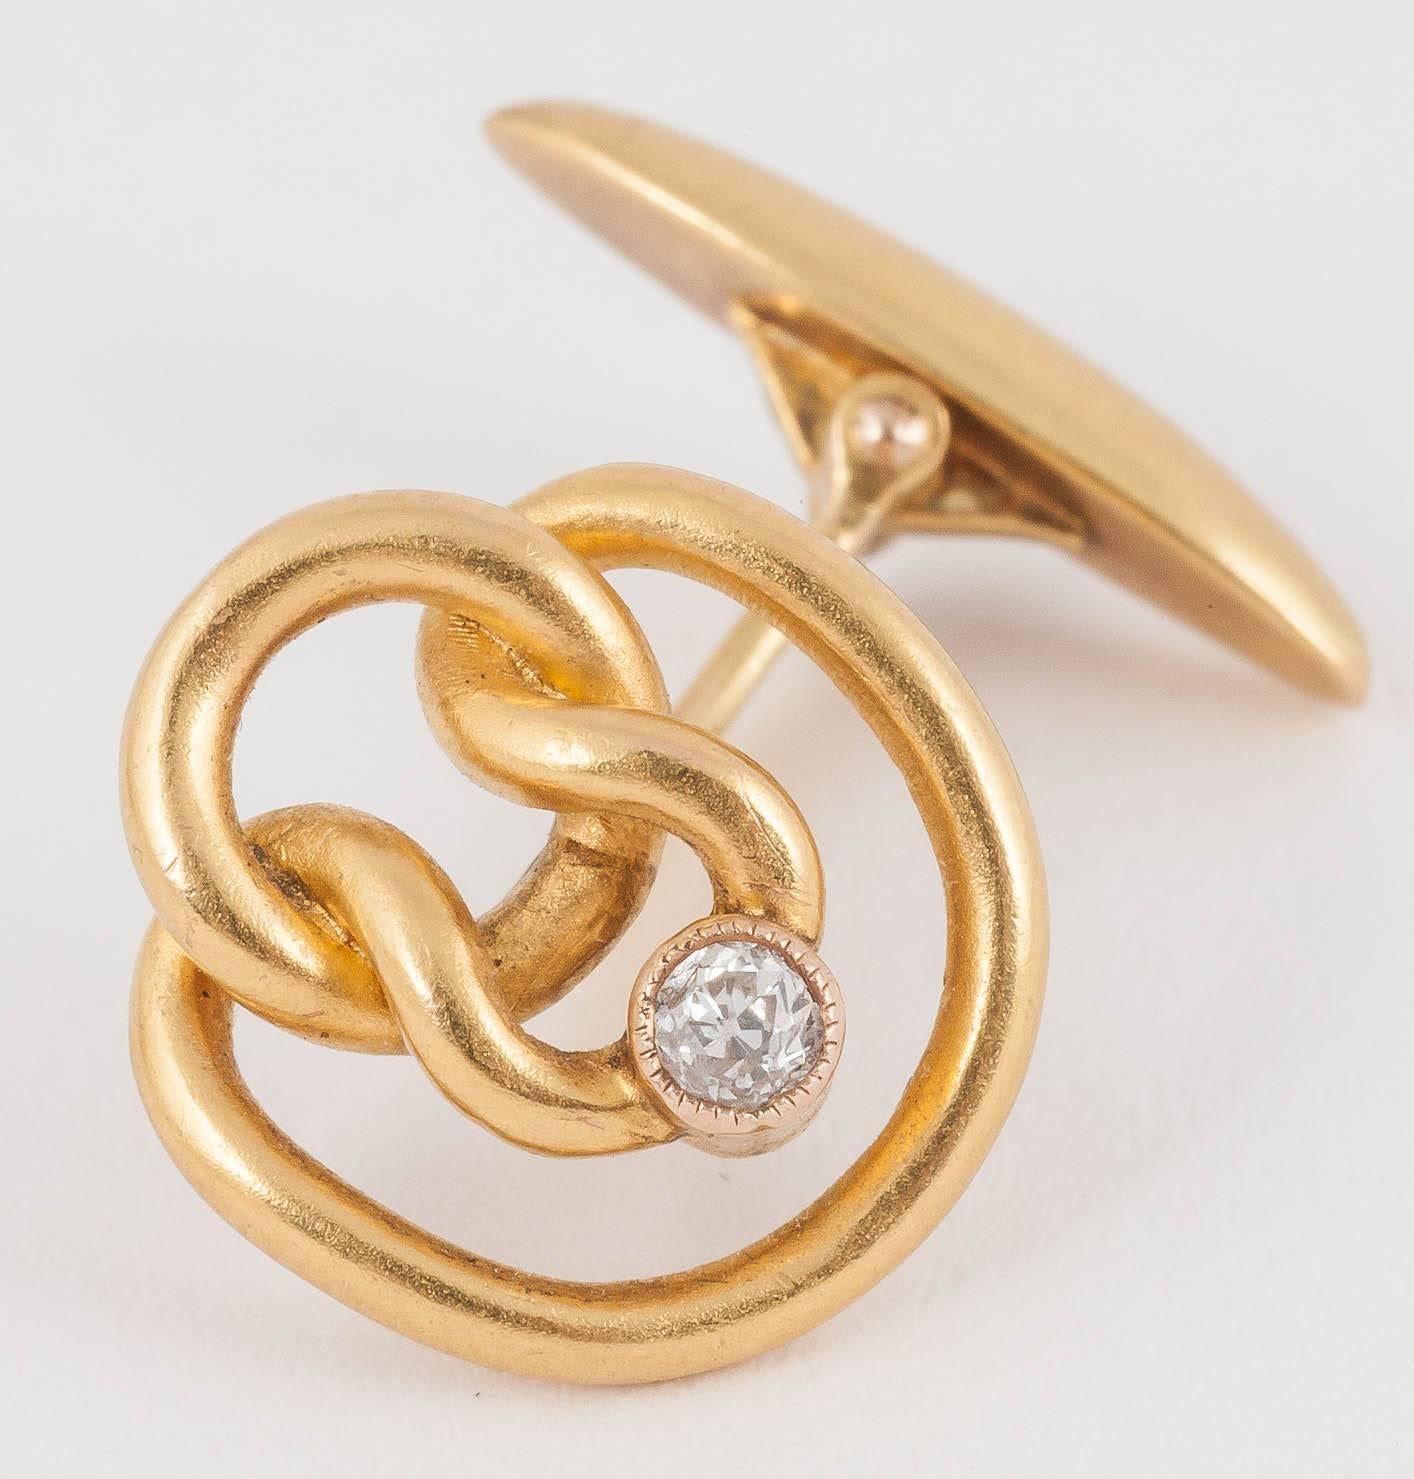 Russian Empire Cufflinks, 14 Karat Gold Entwined Knots with Diamond Collet, Russian circa 1890 For Sale